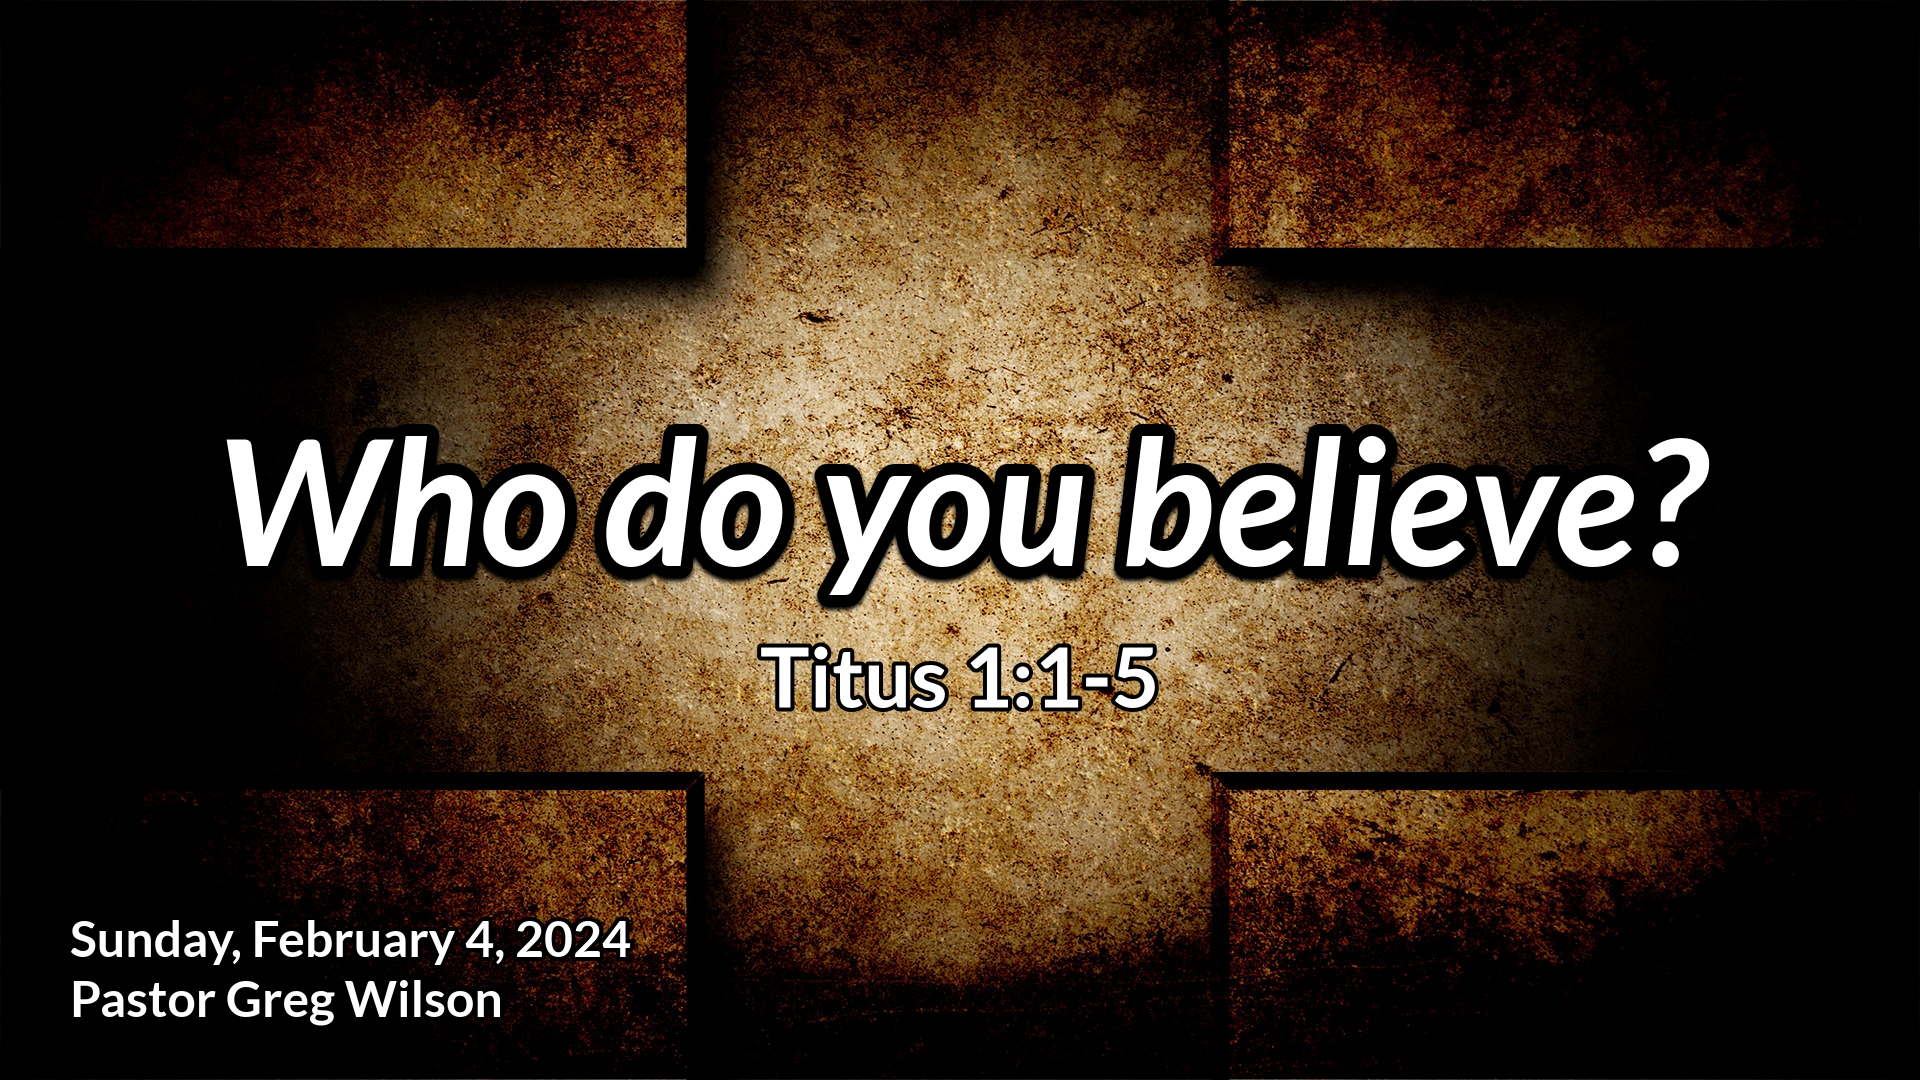 "Who do you believe?"